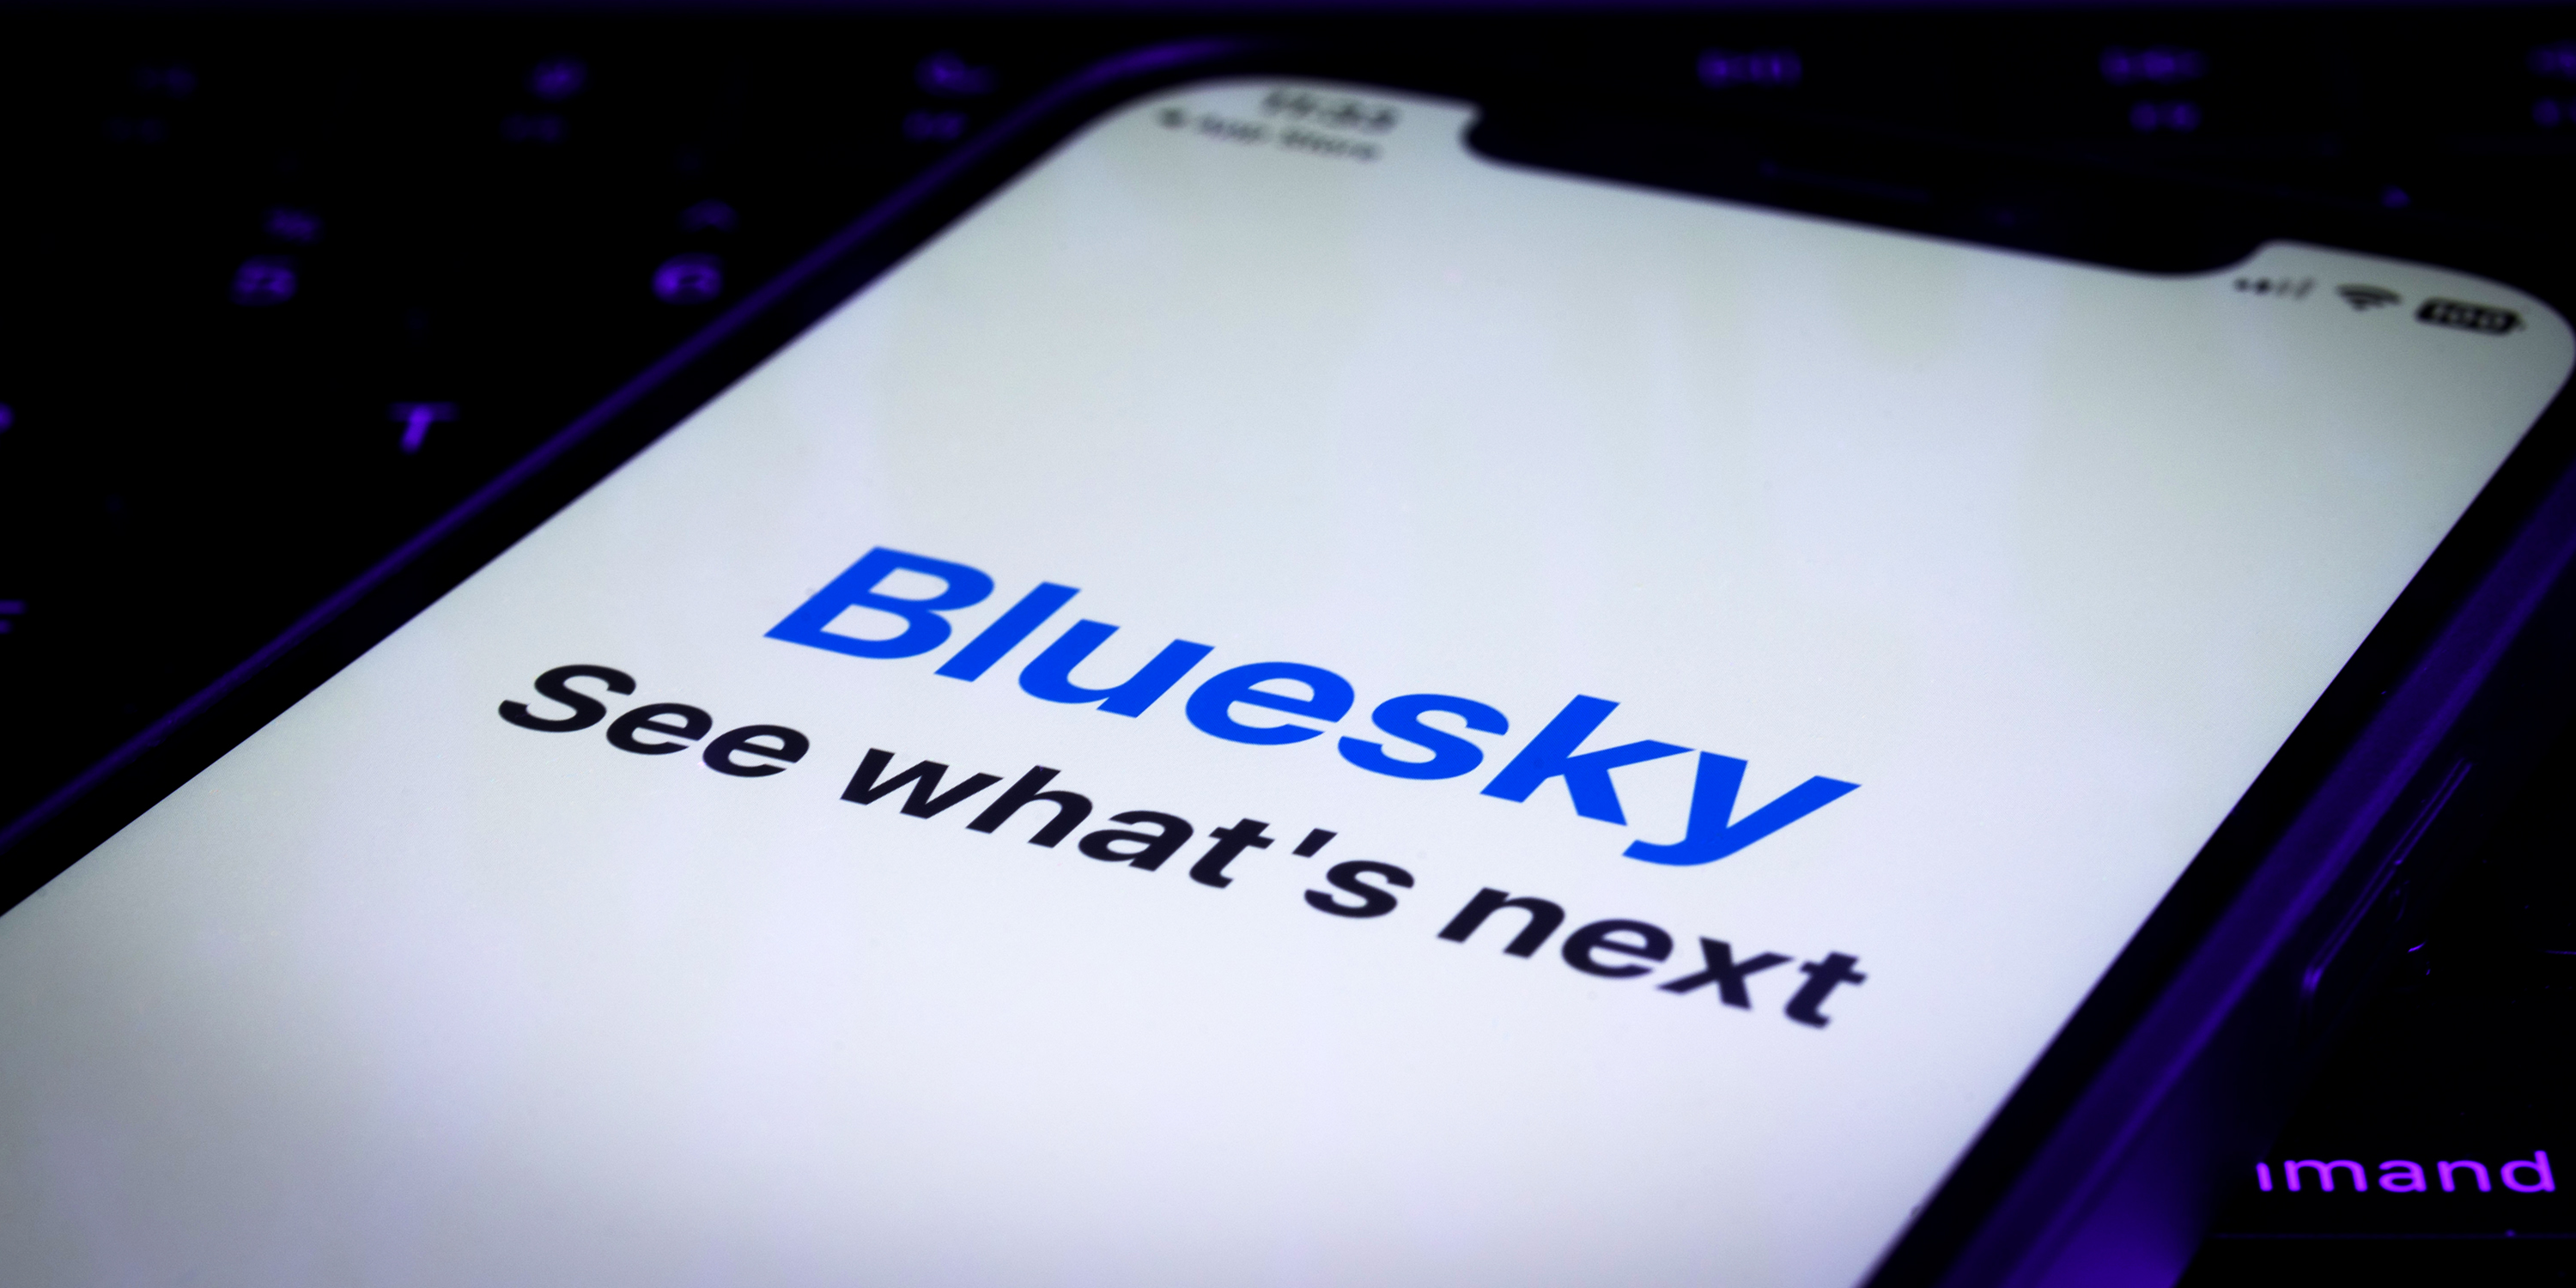 The Bluesky social media app logo is seen on a mobile device in this photo illustration in Warsaw, Poland on 21 April, 2023. Founder Jack Dorsey of twitter has released the Bluesky application on Android. (Photo by Jaap Arriens / Sipa USA)(Sipa via AP Images)